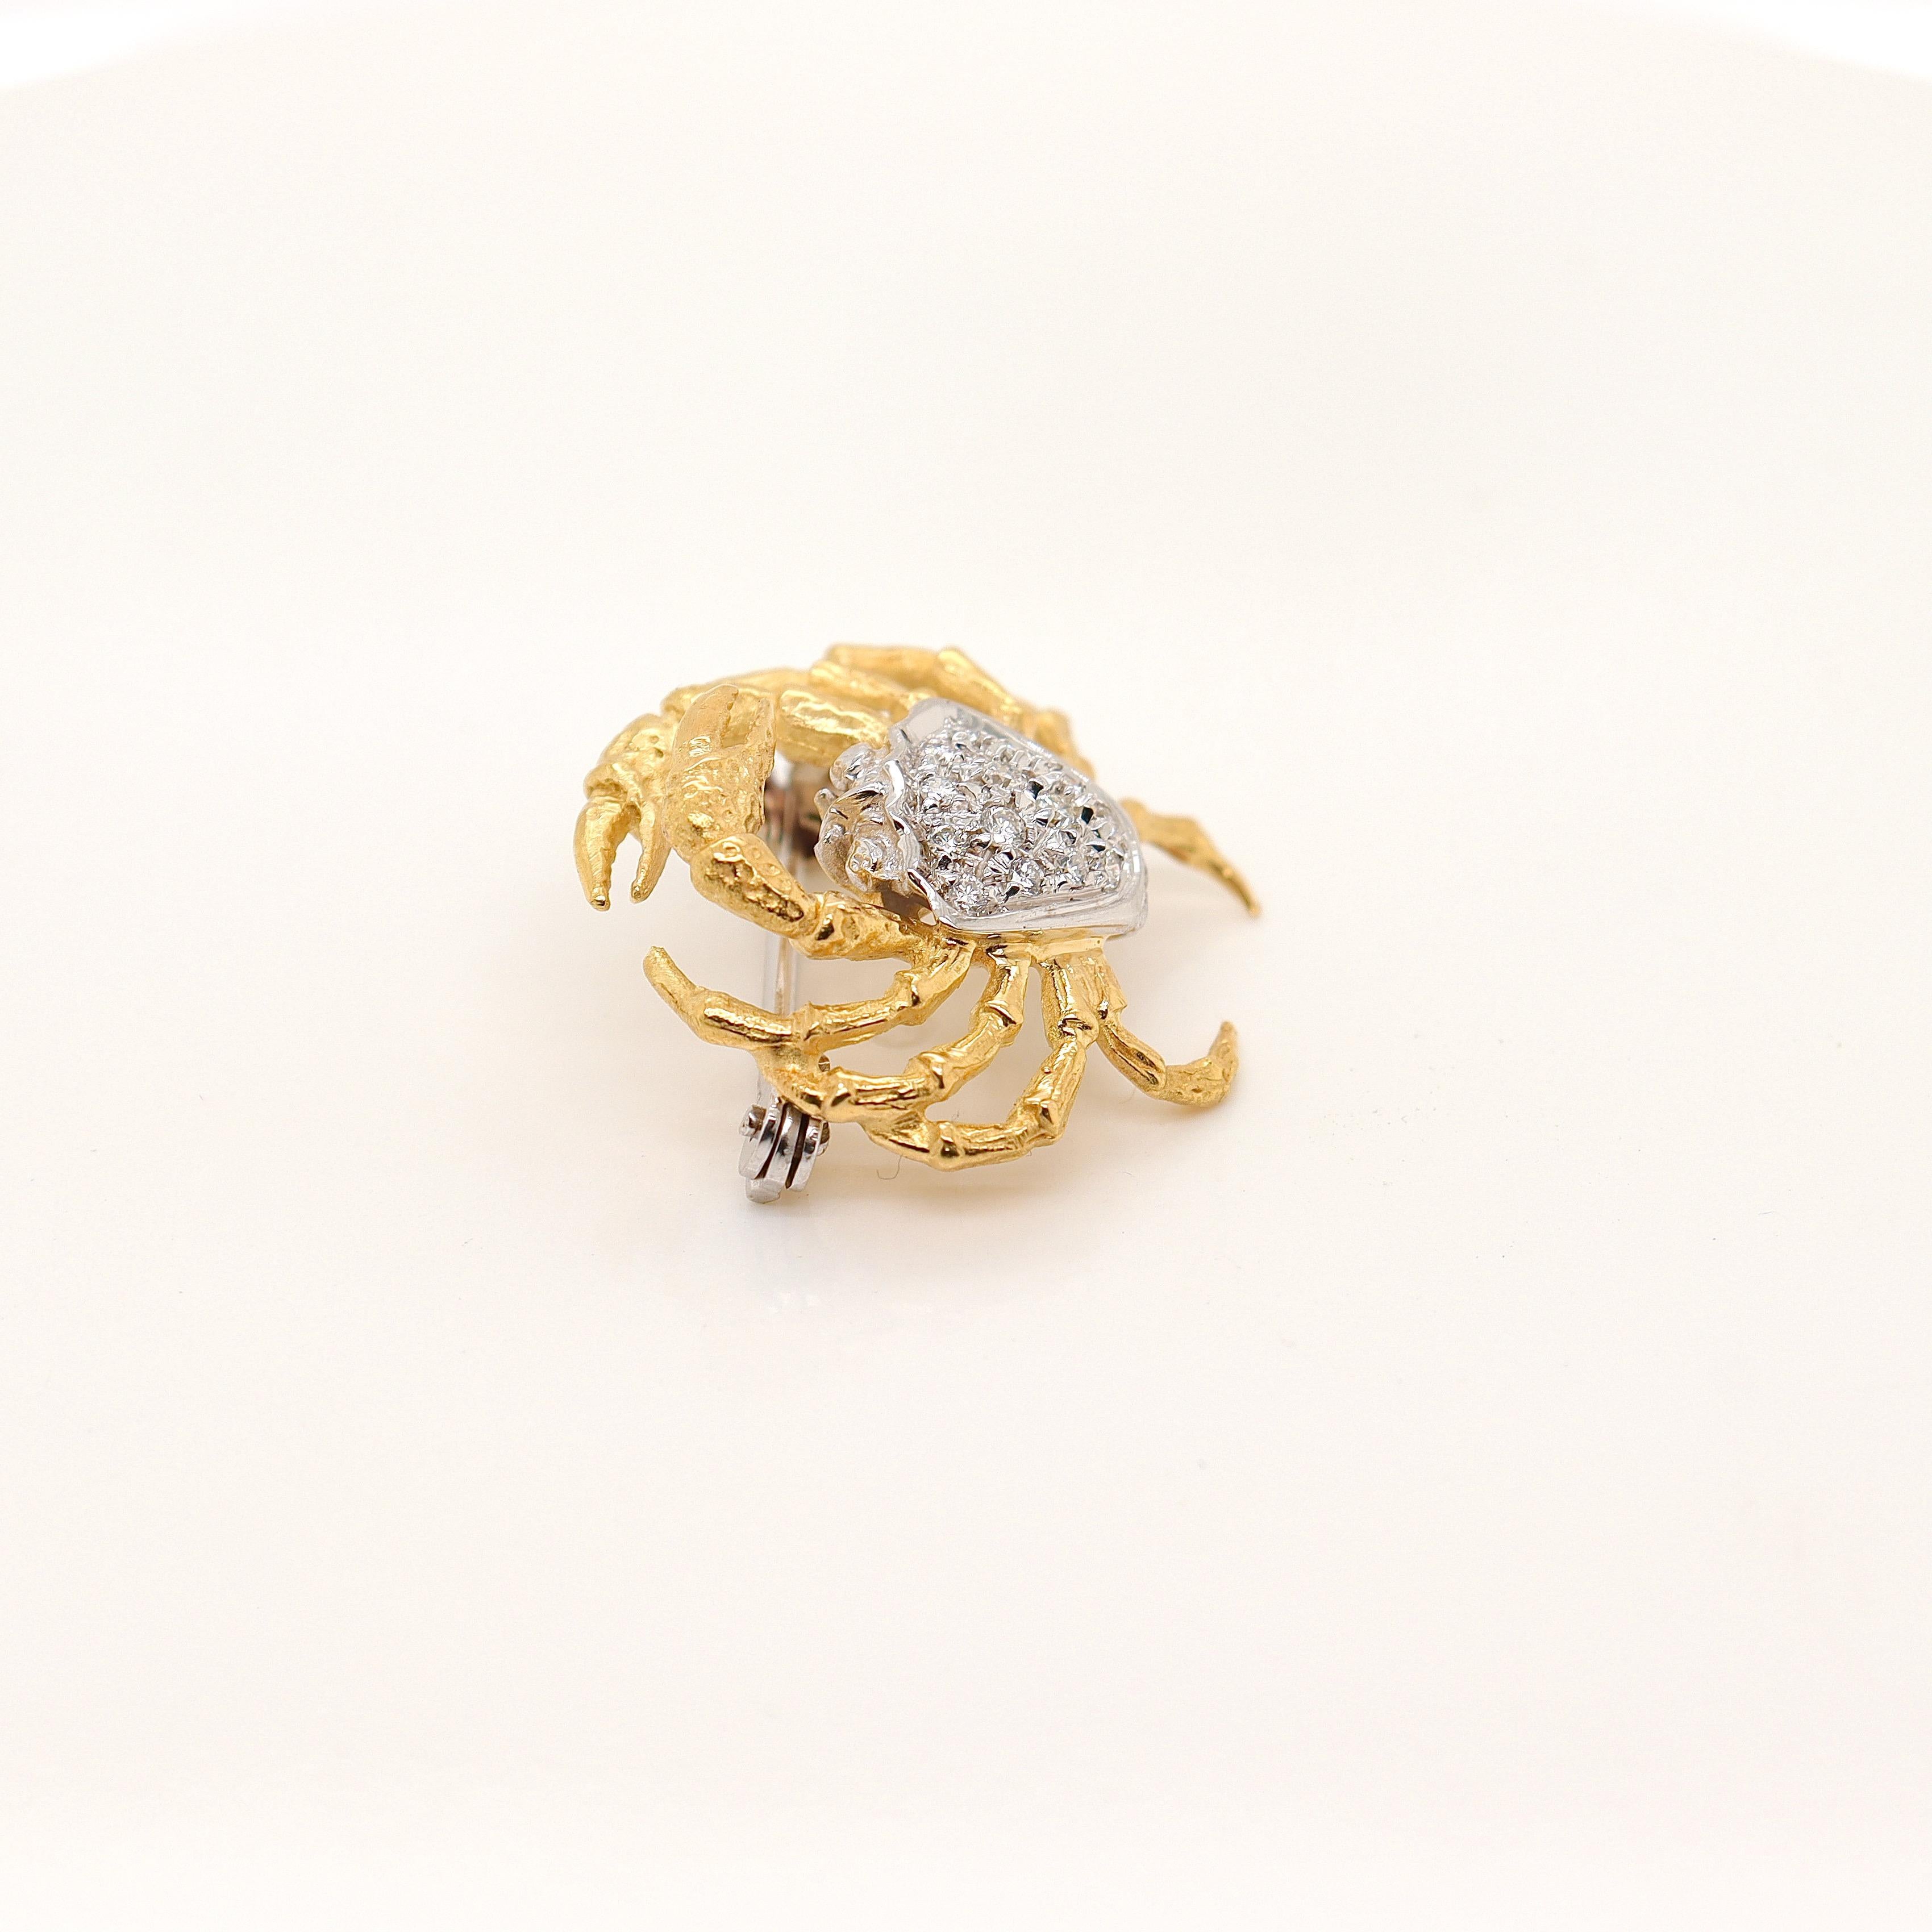 Signed Damiani 18k Gold & Diamond Crab Shaped Brooch or Pin  For Sale 6